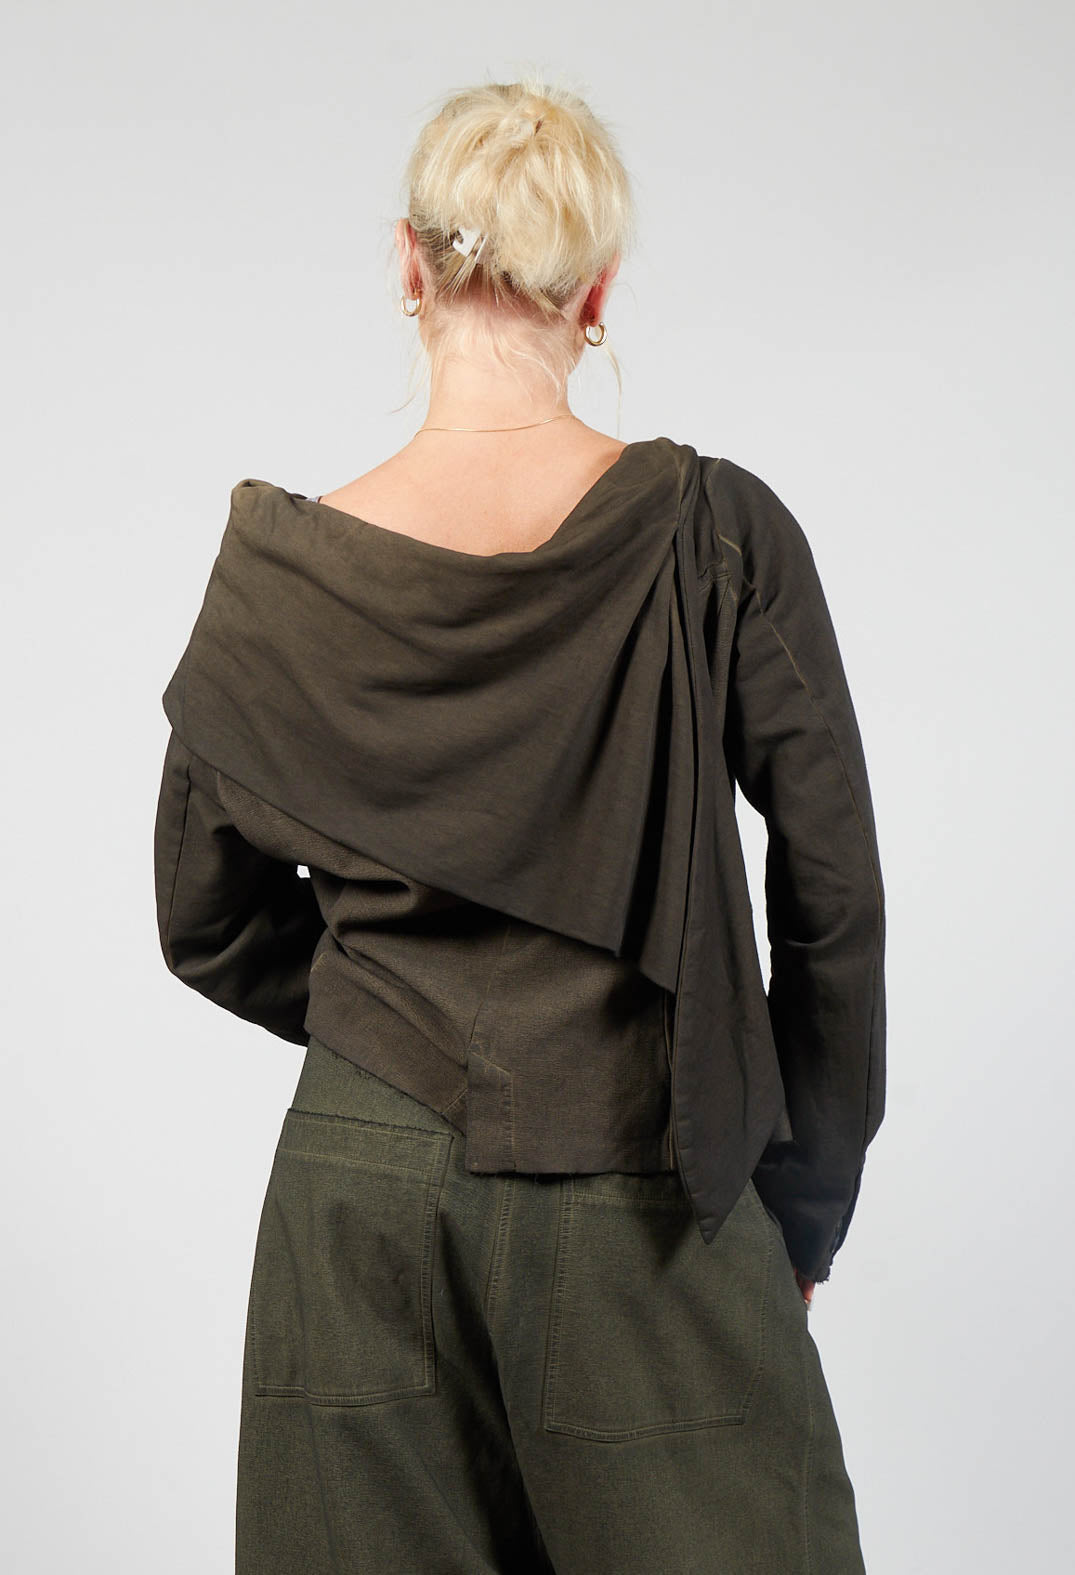 behind shot of a female wearing a khaki utility jacket with a scarf neck